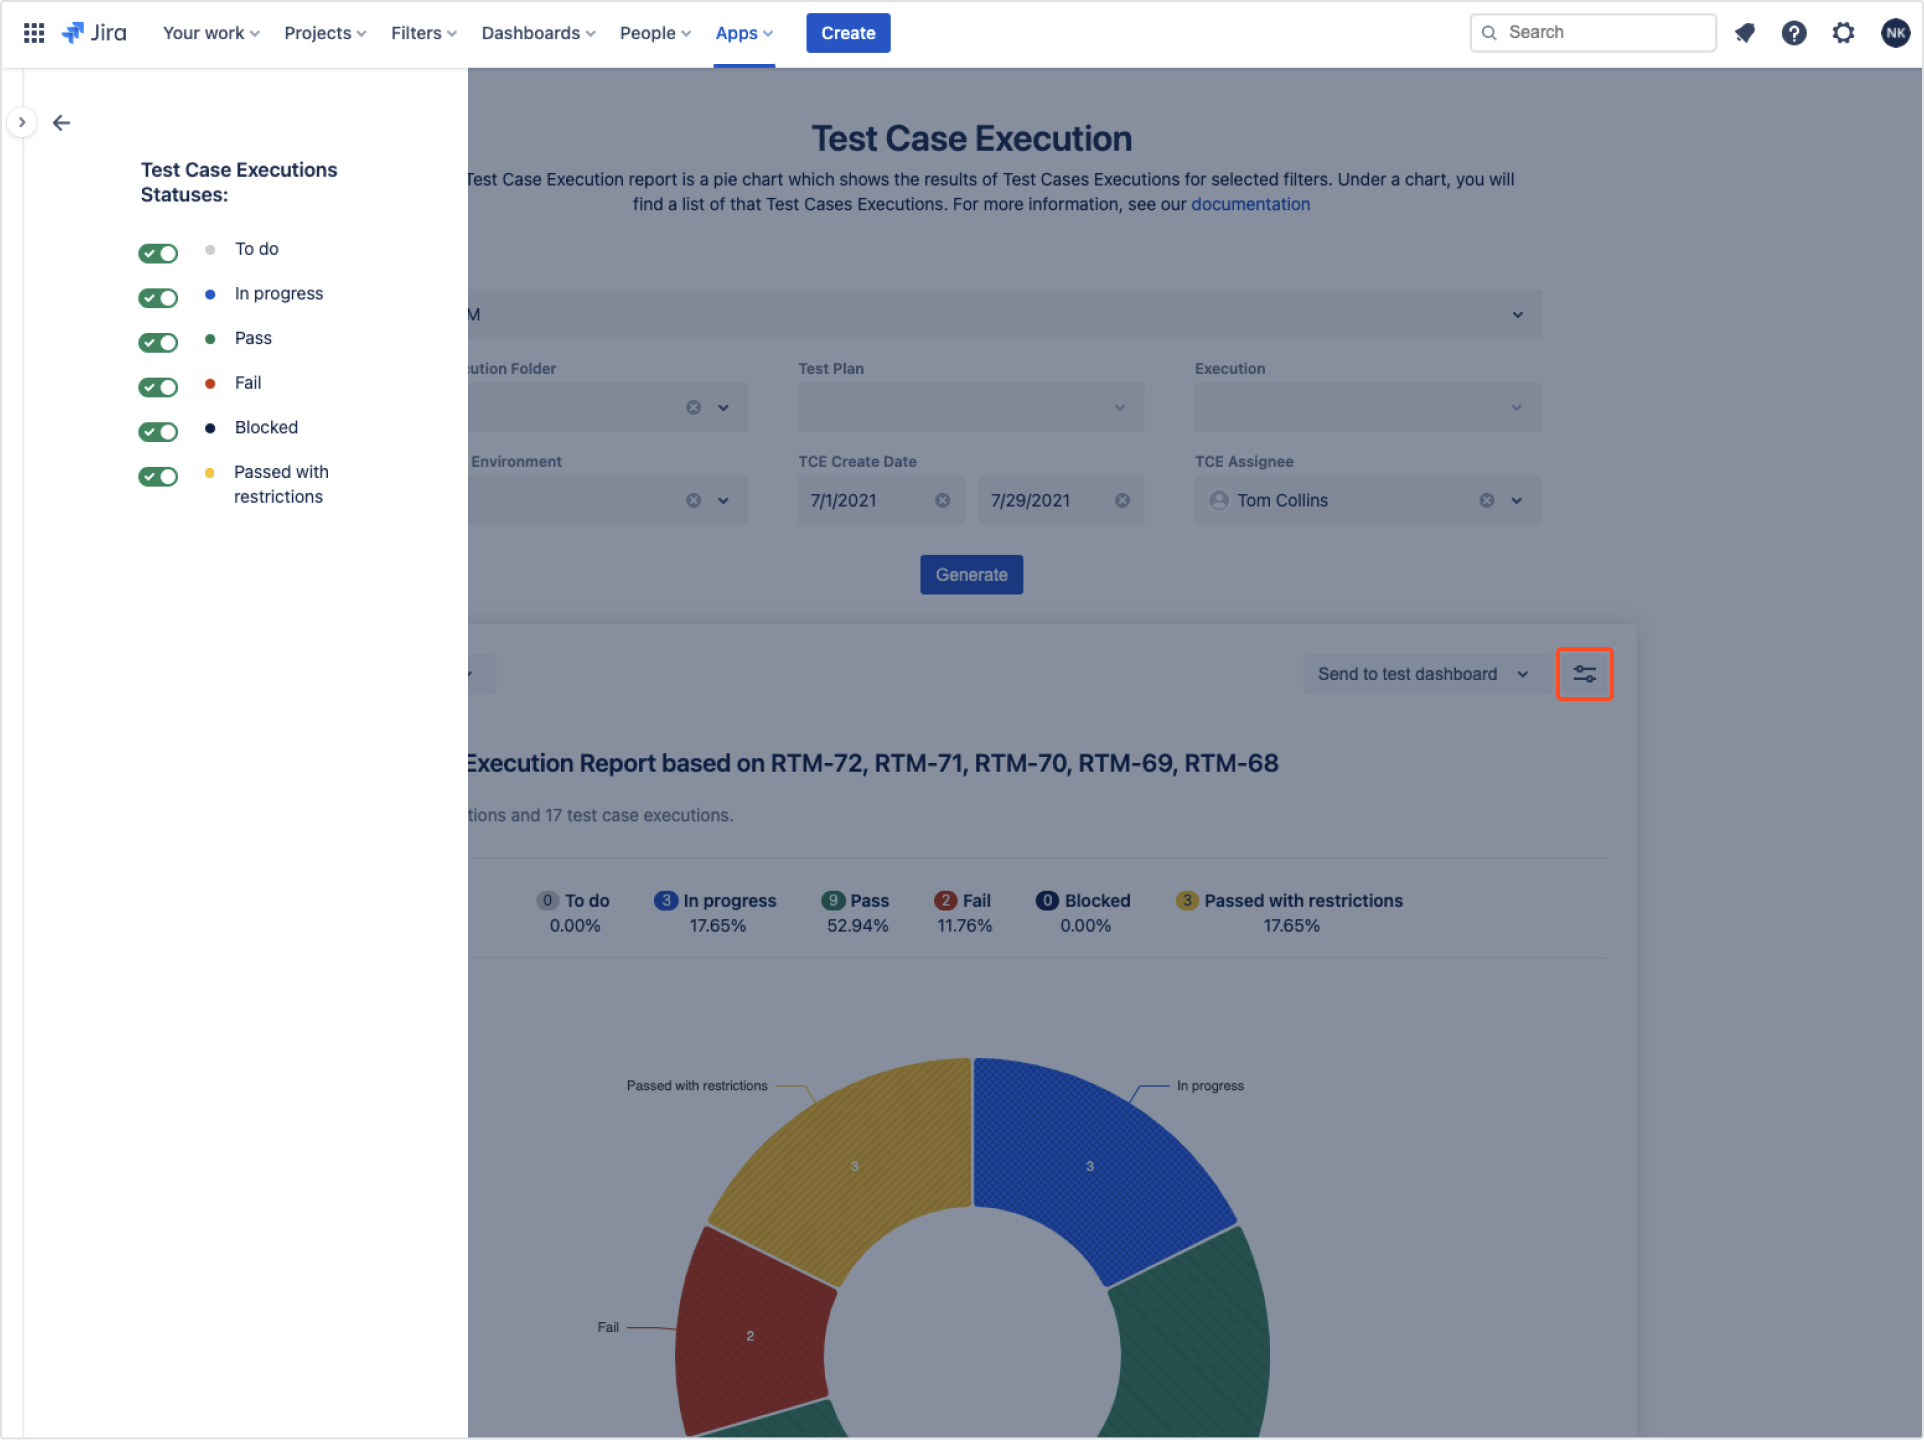 Test Case Executions report with Requirements and Test Management for Jira app